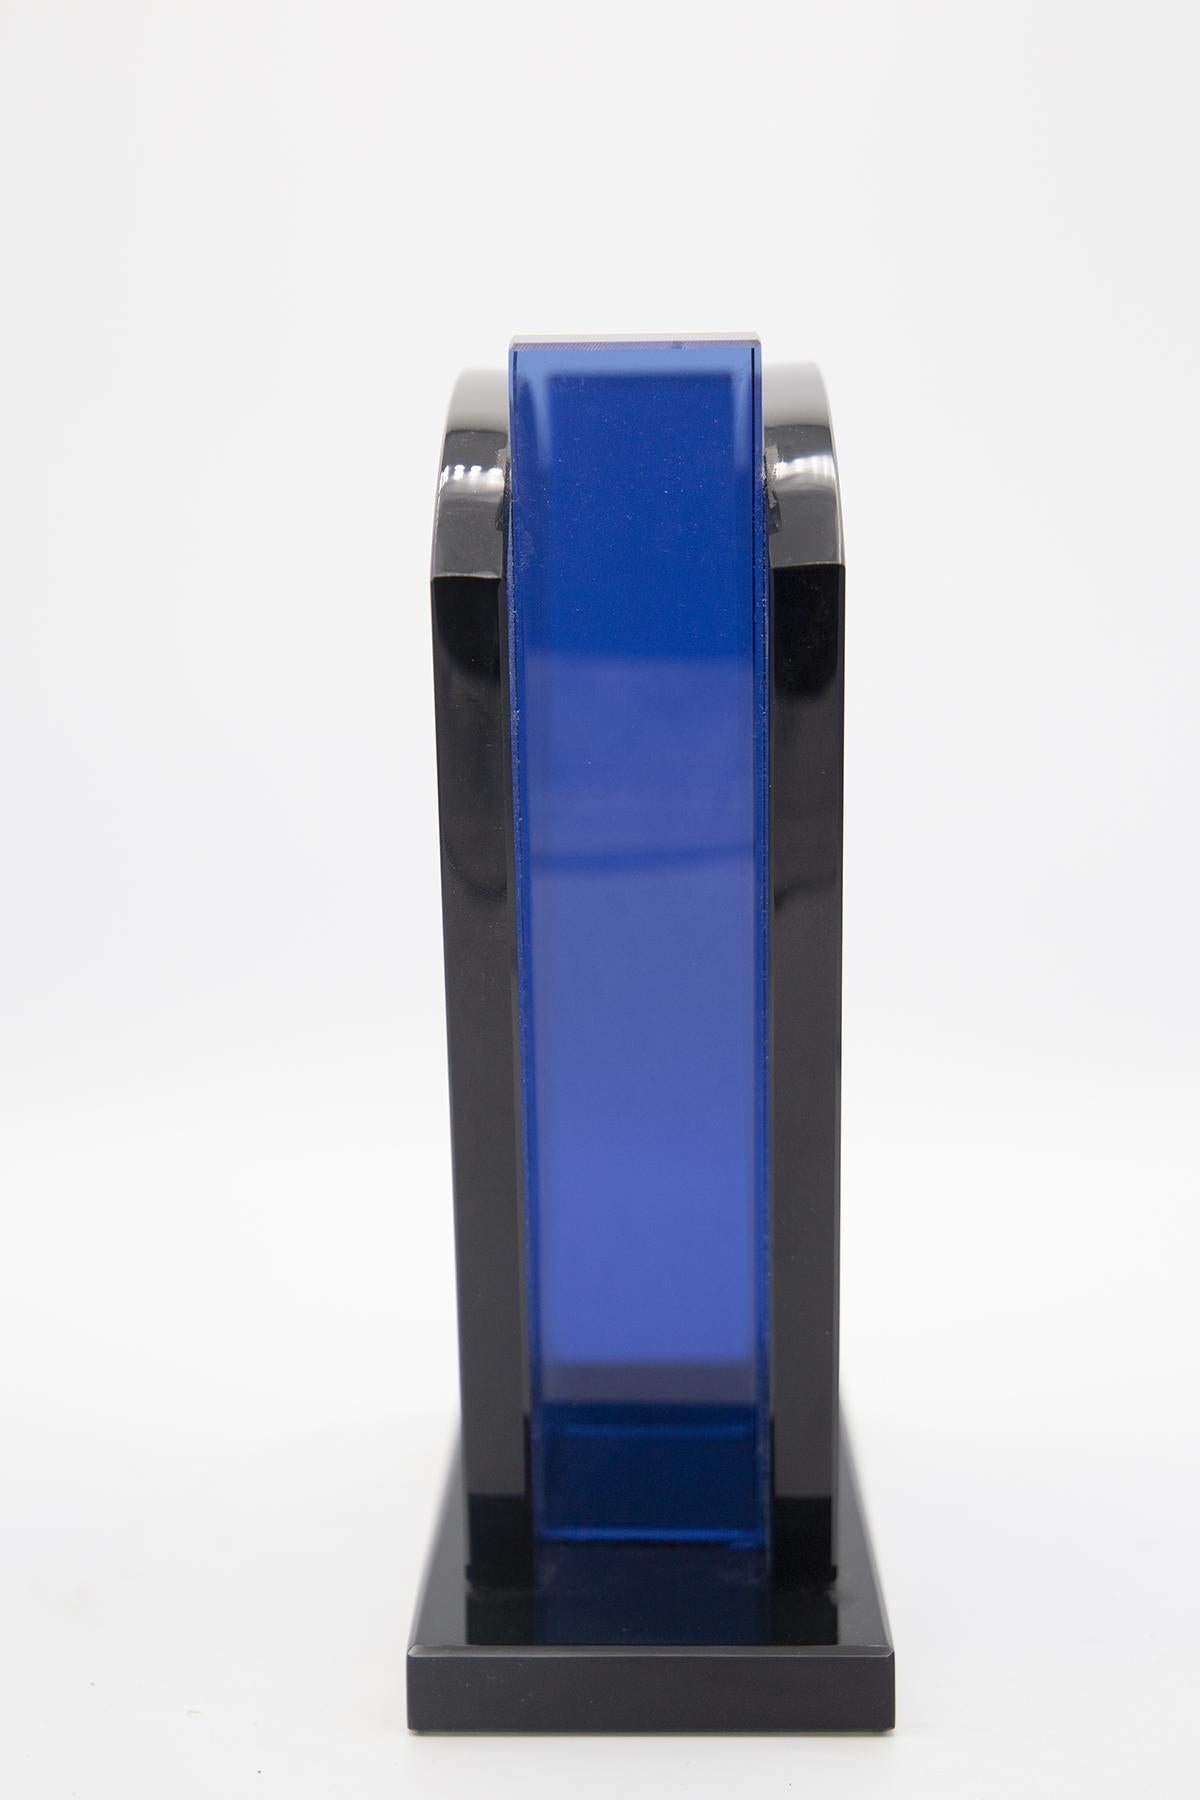 Extraordinaire sculptural vase by Ettore Sottsass for Fontana Arte from the late 1980s.
The sculptural vase is made of wonderful blue glass and as you can see from the photos have a particular shape. The vase is part of a collection that Fontana